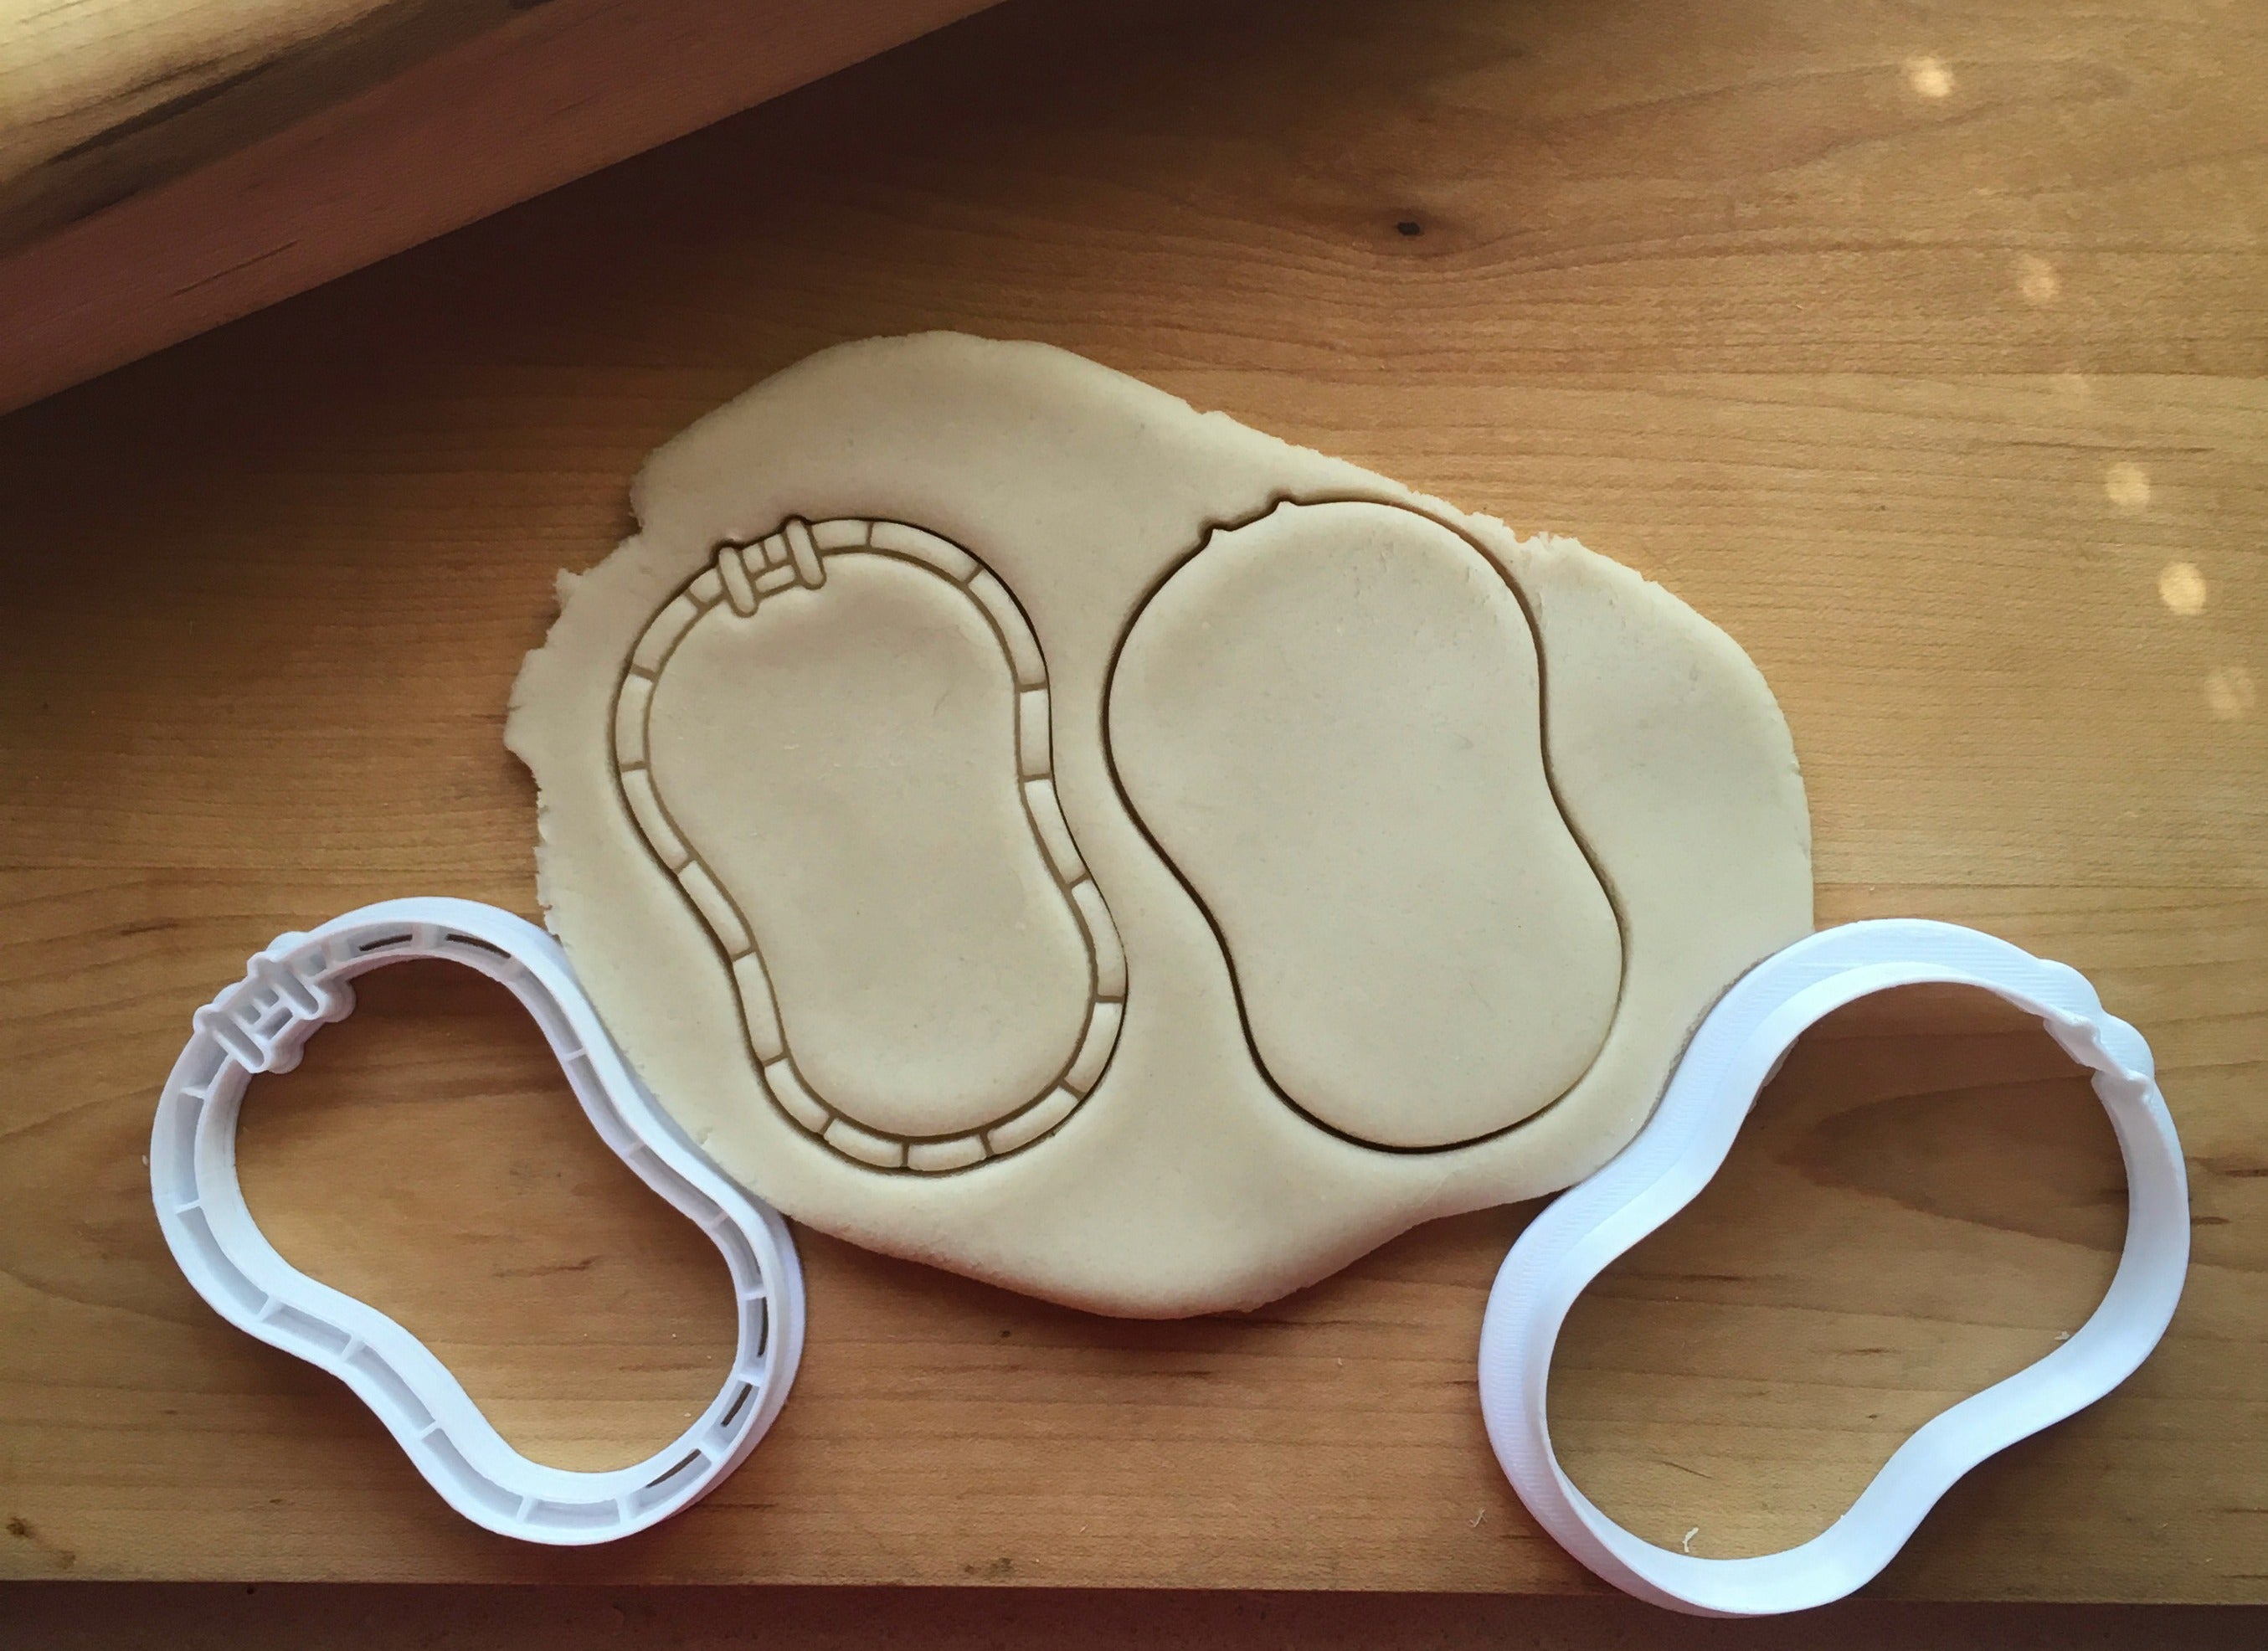 Set of 2 Pool Cookie Cutters/Dishwasher Safe